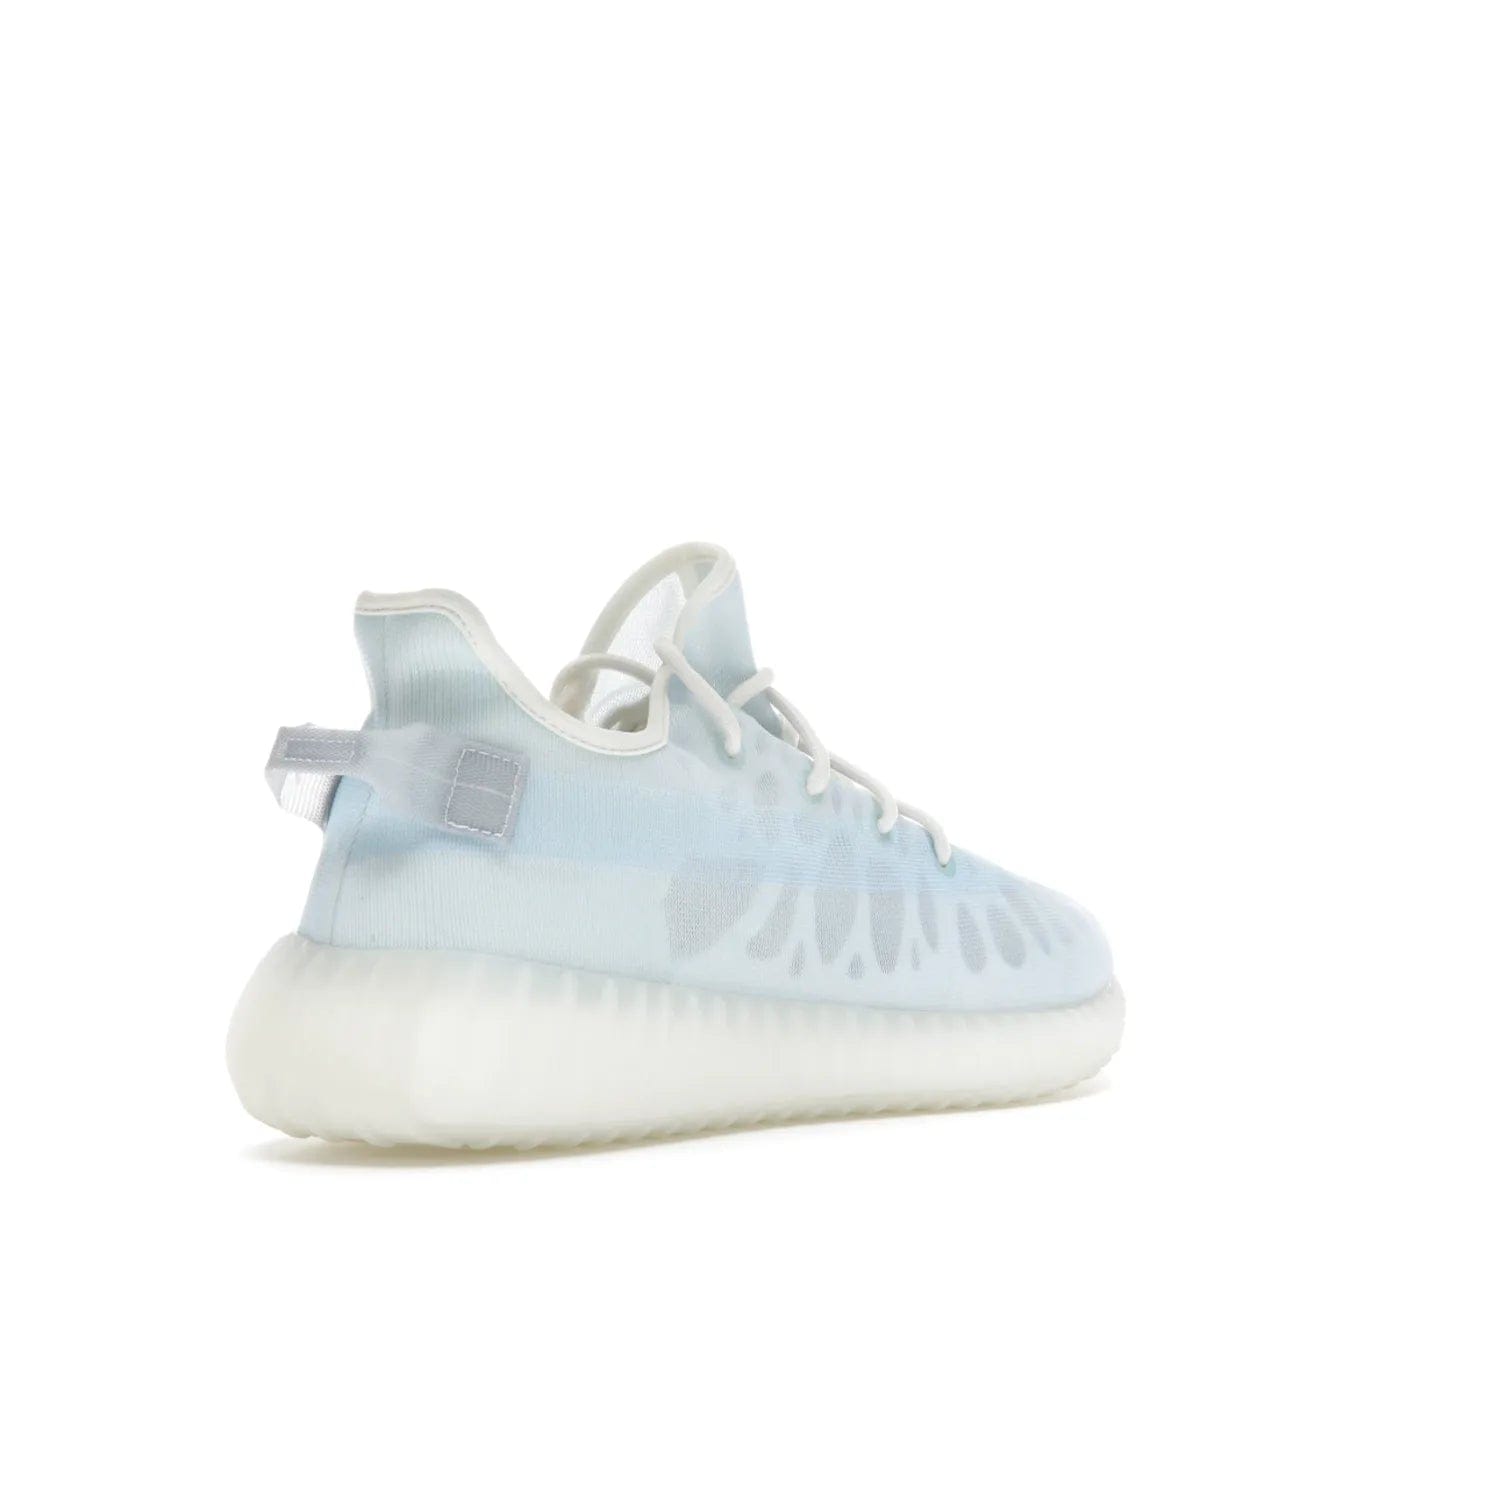 adidas Yeezy Boost 350 V2 Mono Ice - Image 32 - Only at www.BallersClubKickz.com - Introducing the adidas Yeezy 350 V2 Mono Ice - a sleek monofilament mesh design in Ice blue with Boost sole and heel pull tab. Released exclusively in the US for $220.